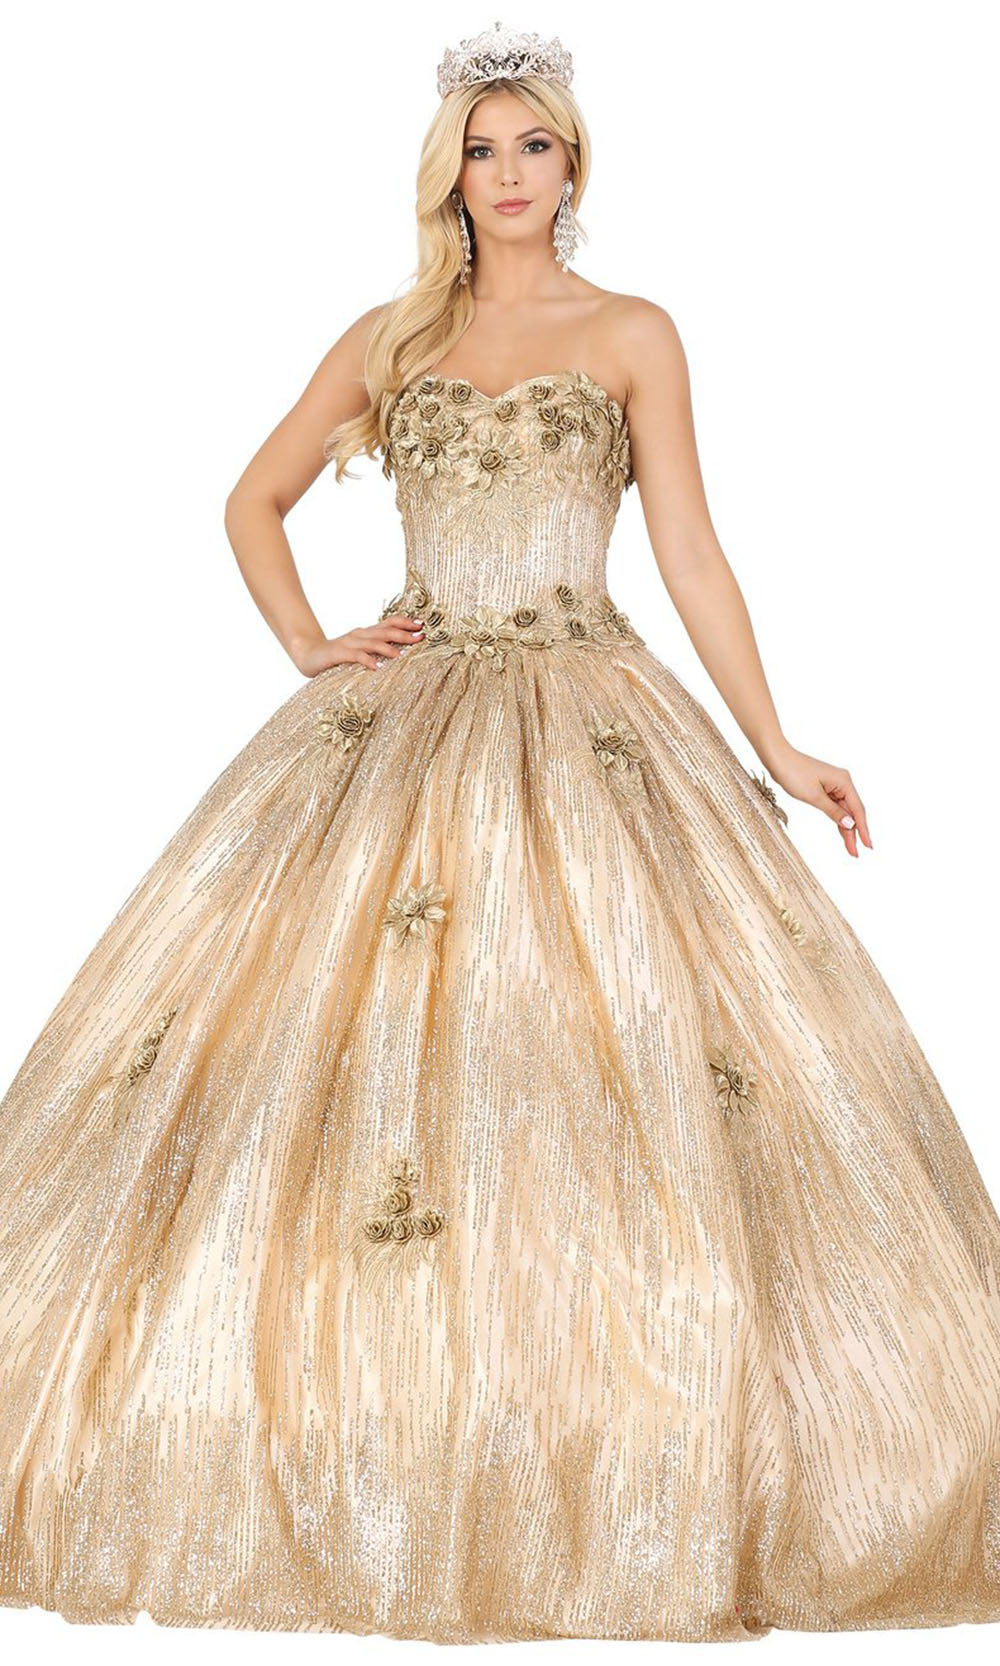 Dancing Queen - 1533 Strapless Floral Applique Glittered Gown In Gold